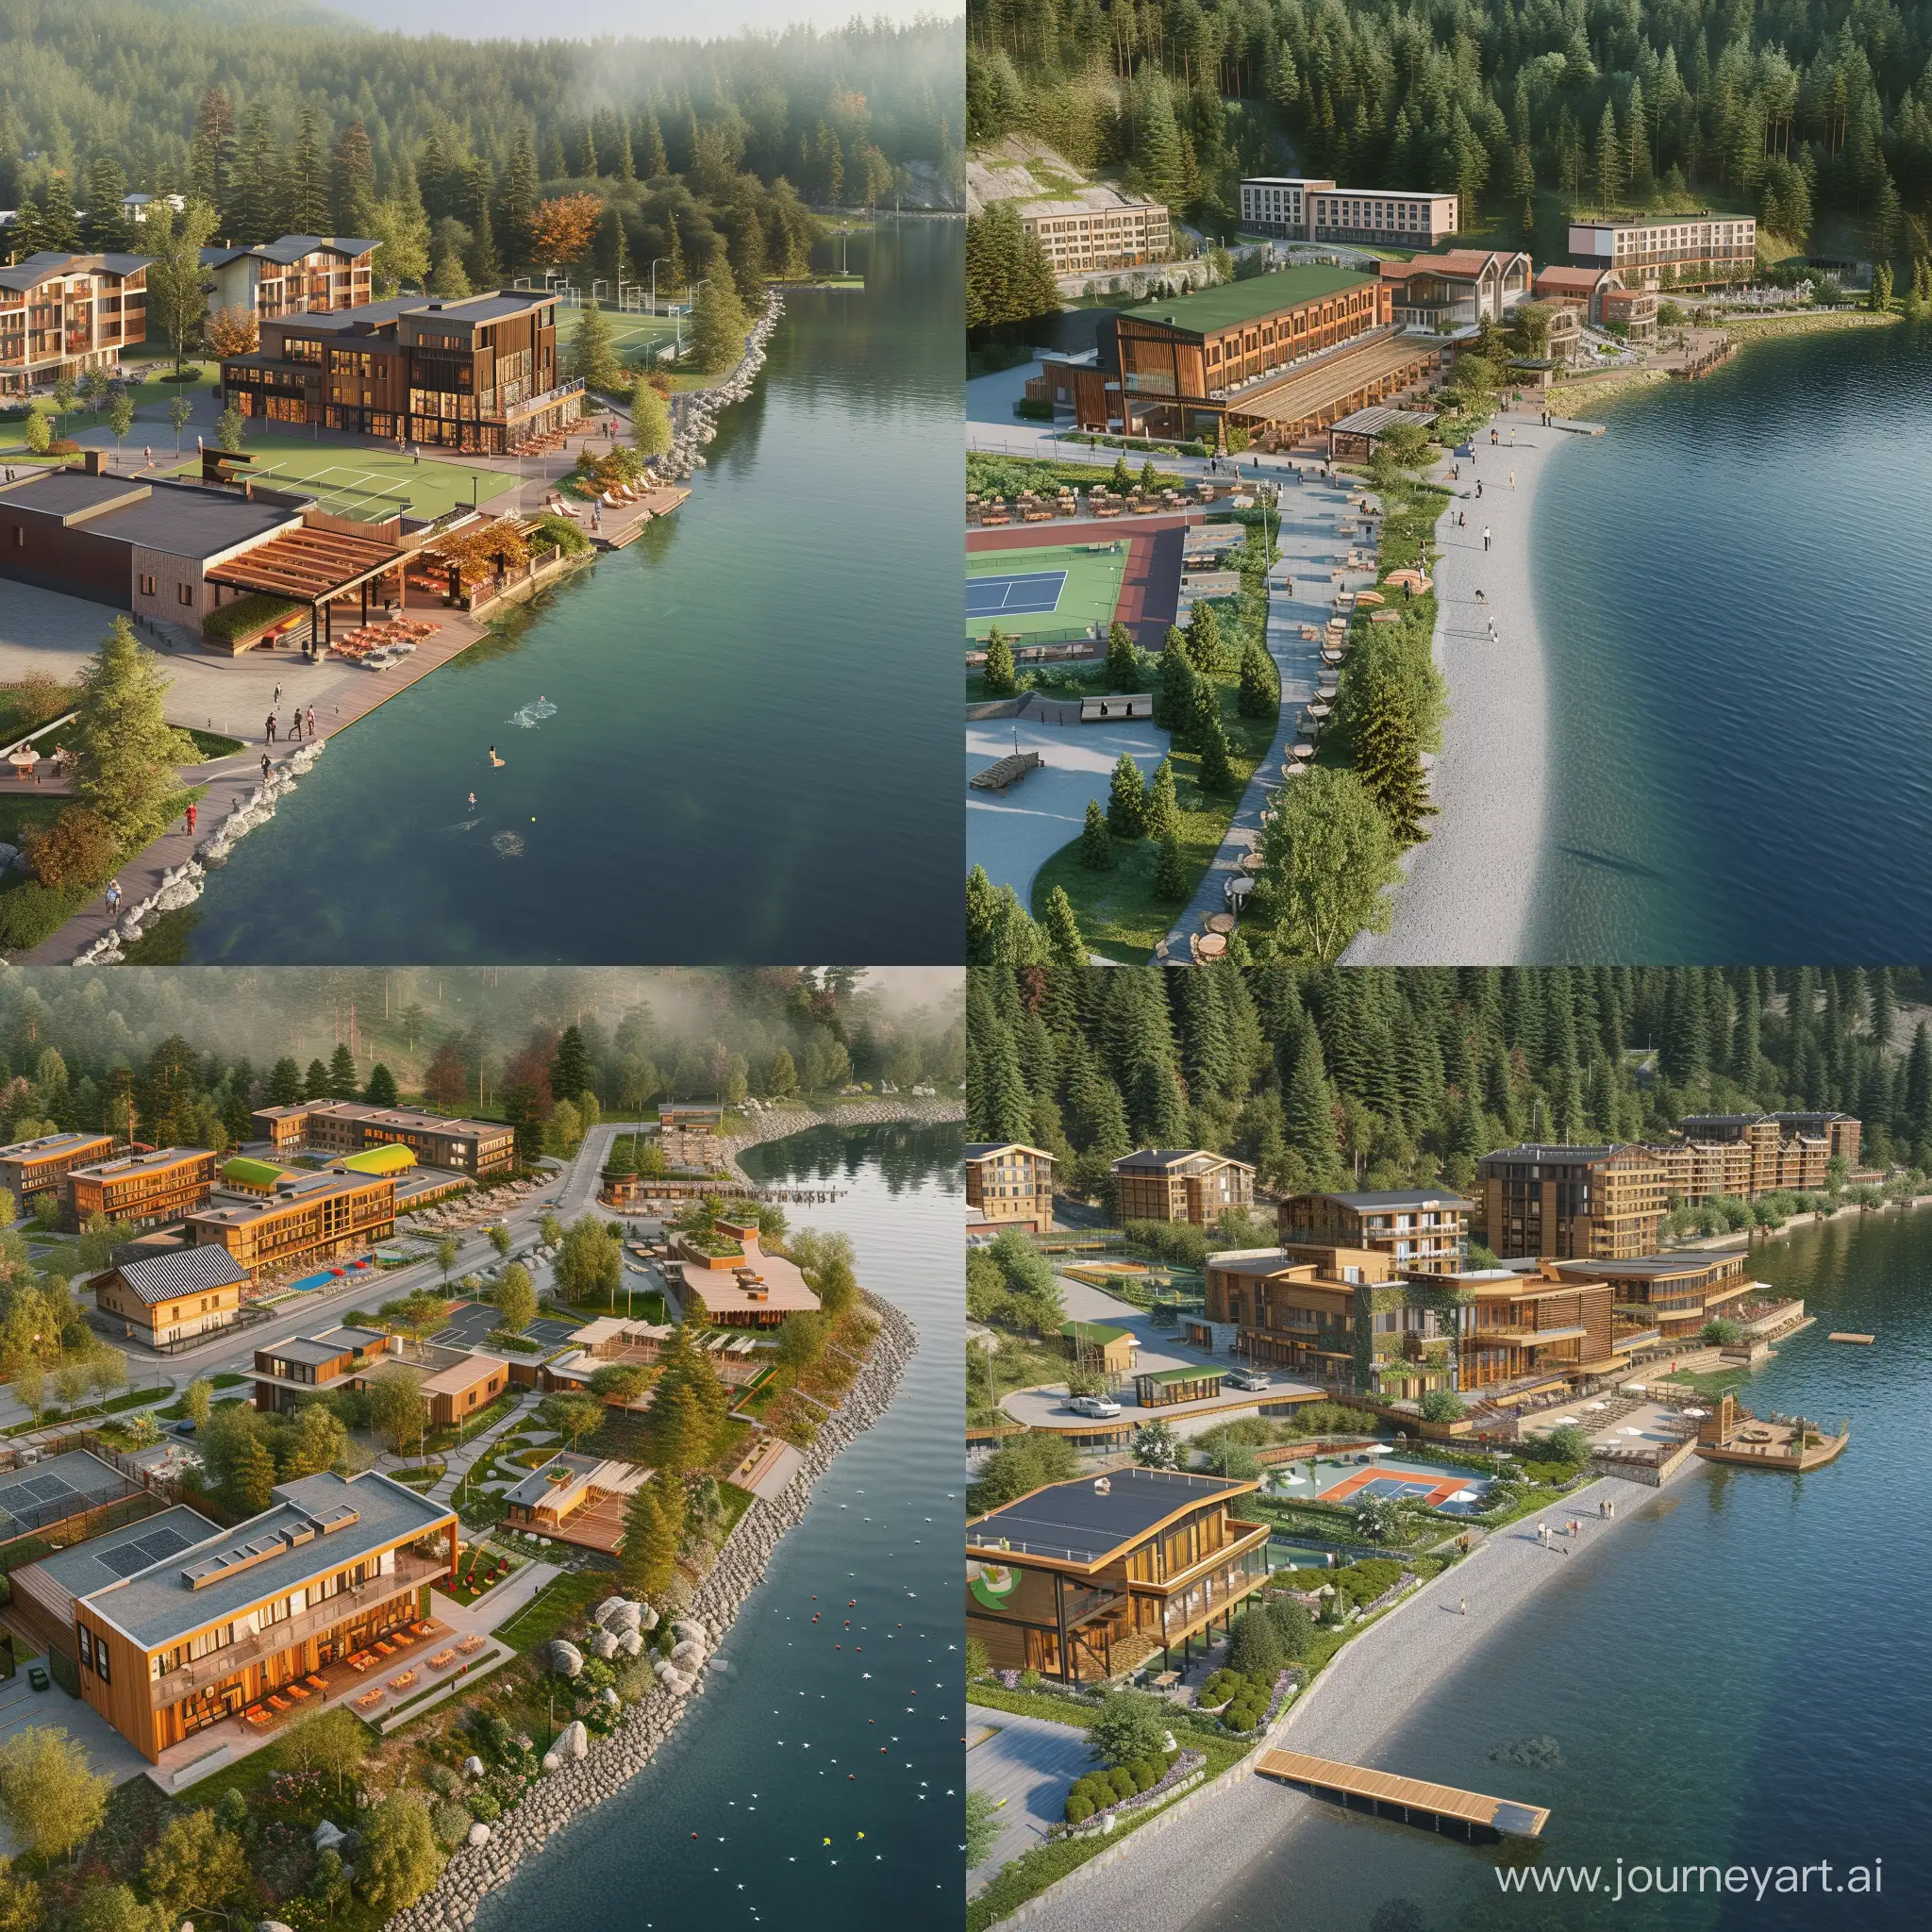 visualization of an urban development project with landscaping along the lake and a sanatorium complex  A flat area along the lake, on one side of which there is a mixed forest, and on the other there is the infrastructure of the settlement.  On the shore of the complex there is a sanatorium complex consisting of several buildings: the main one is a three-storey hotel, a sports center with an outdoor pool, a tennis court, a training ground, a medical building with a sauna, an entertainment center with an outdoor cinema and a restaurant.   The buildings of the sanatorium complex are made in the same architectural modern minimalist style: with panoramic windows, bright facades, large terraces.   To the left of the complex there is a residential residential complex with buildings of 3-6 floors. The houses are made in eco-style with wooden and stone elements on the facades. There are only about 10 houses in the complex. on the territory of the complex there is a bakery and a cafe with an open veranda, a sports ground with tables for